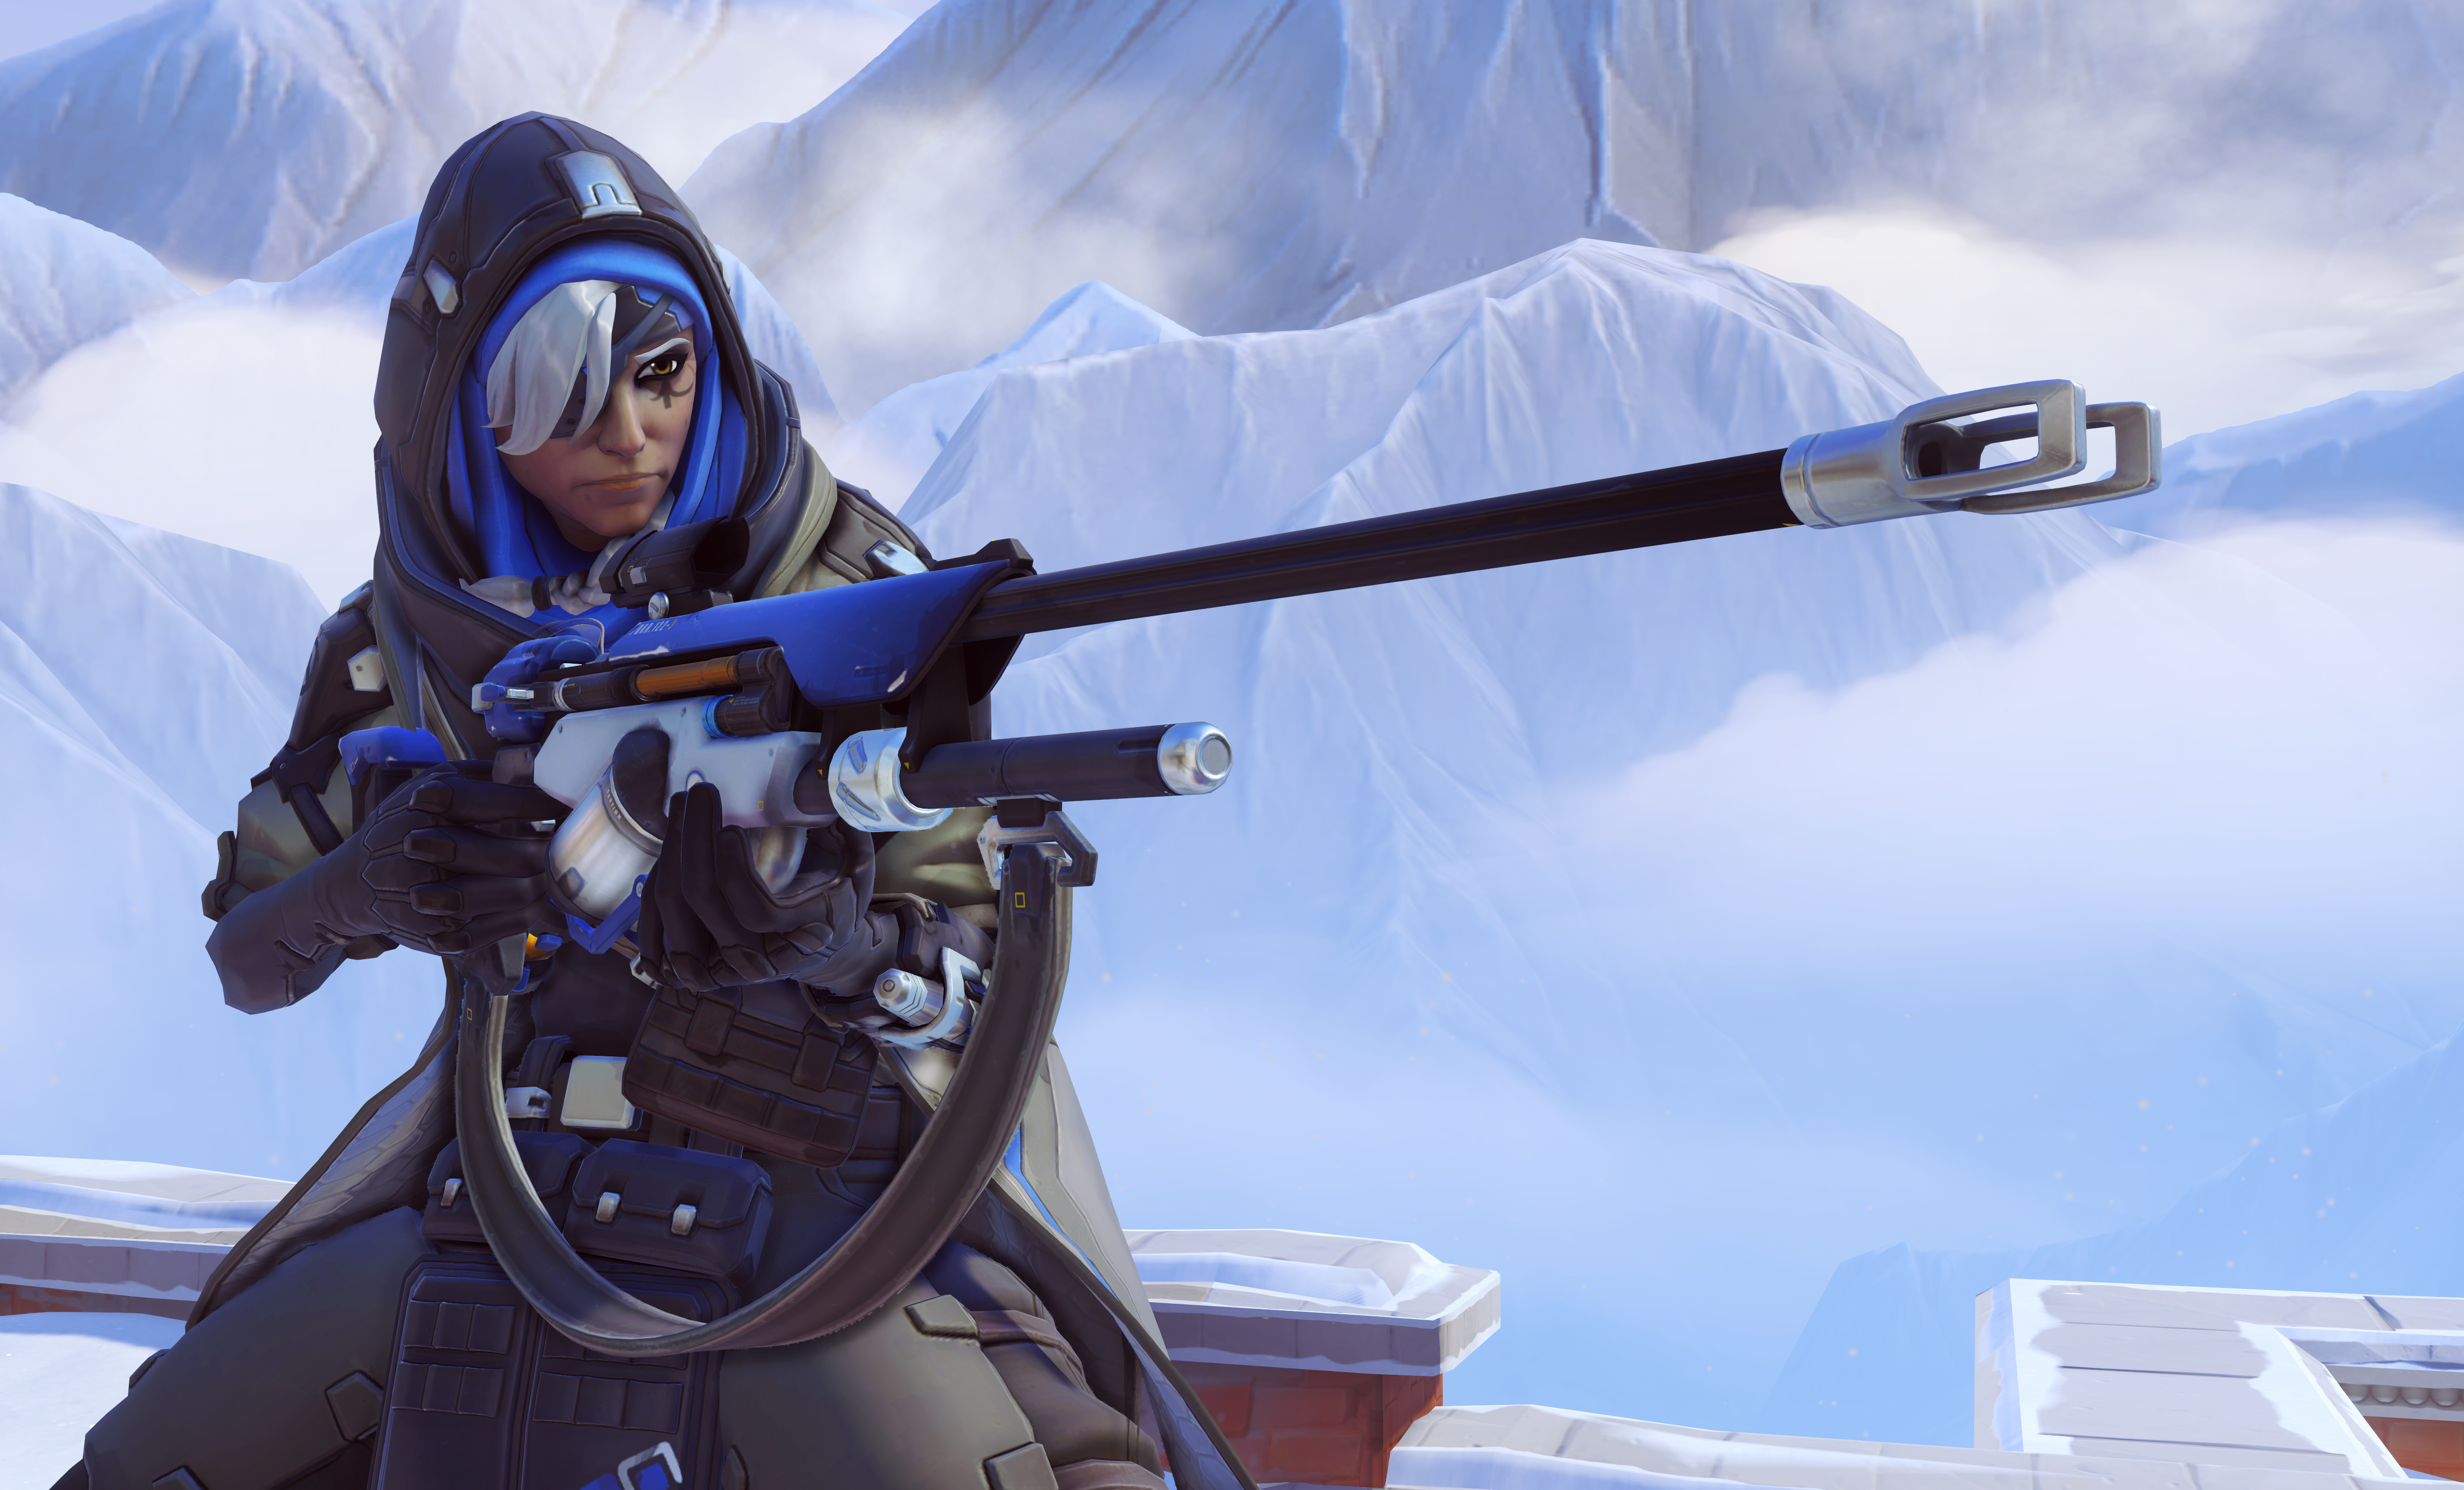 5 tips to improve your aim in Overwatch 2